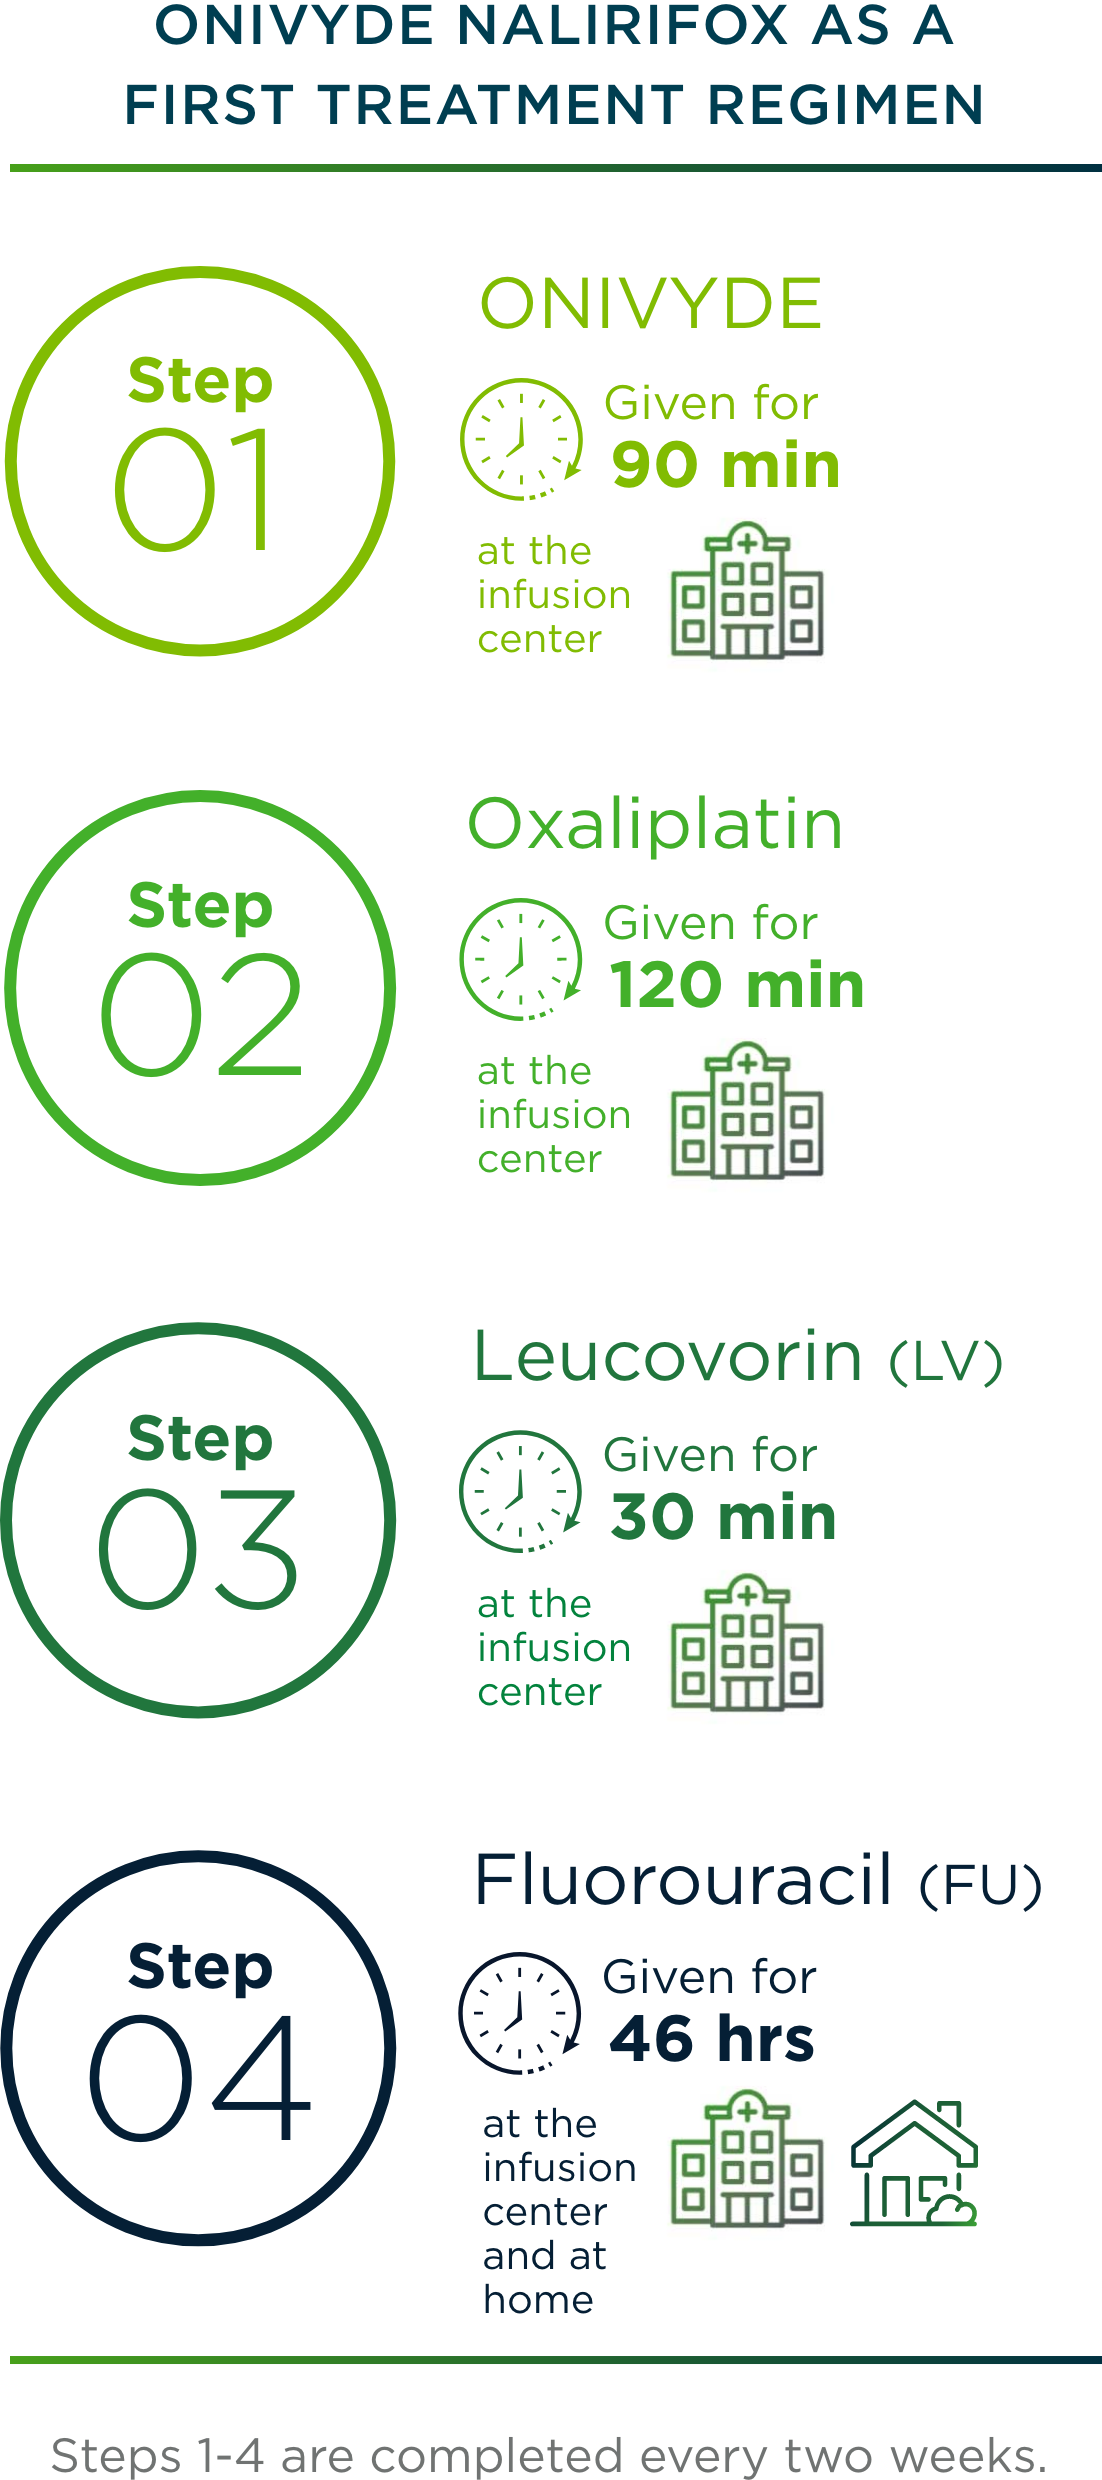 The treatment cycle for ONIVYDE + FU/LV + oxaliplatin as a first treatment for metastatic pancreatic cancer.